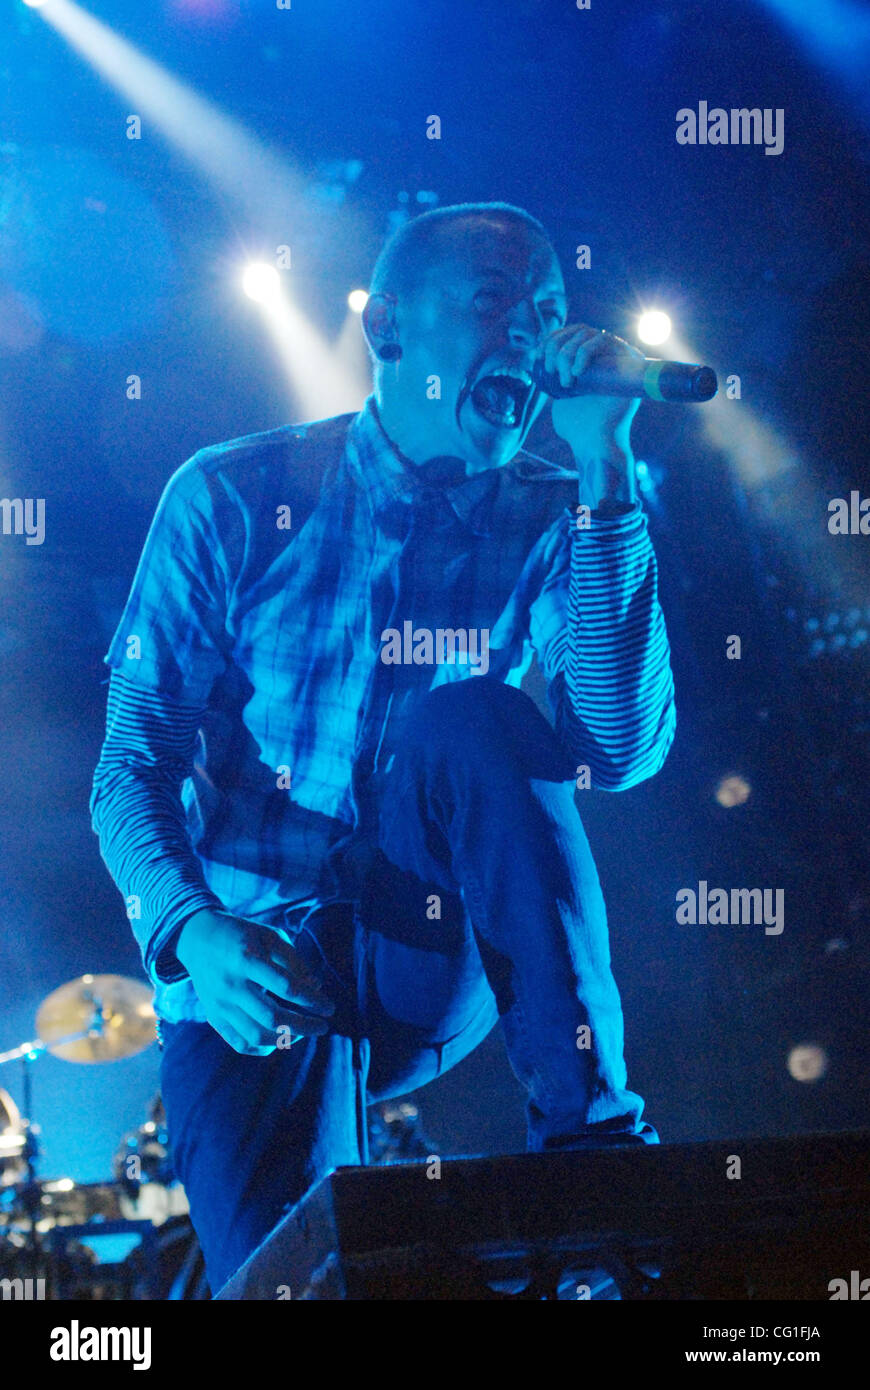 Aug. 13, 2007  Raleigh, NC; USA, Singer CHESTER BENNINGTON of the band Linkin Park performs live as the 2007 Projekt Revolution Tour makes a stop at Walnut Creek Amphitheatre located in Raleigh.  Copyright 2007 Jason Moore. Mandatory Credit: Jason Moore Stock Photo